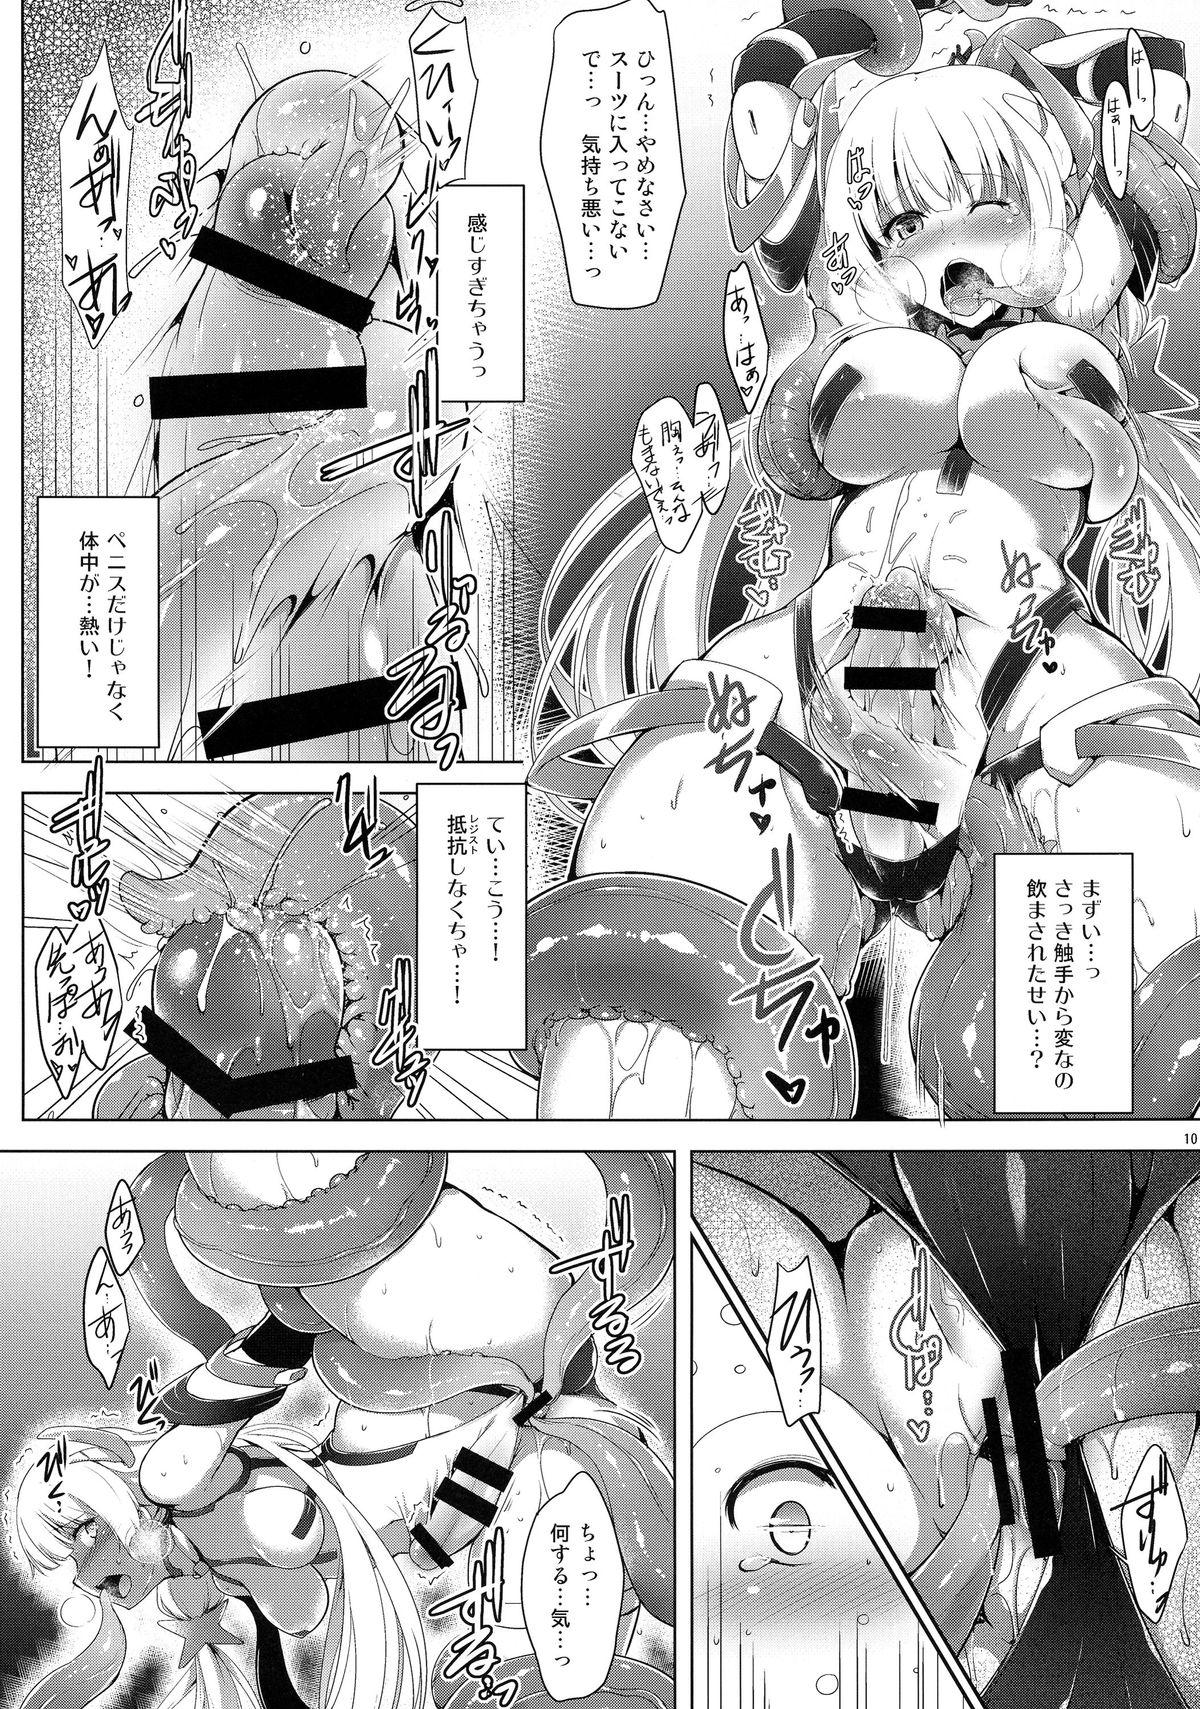 Brazil K.231 - Expelled from paradise Assfingering - Page 10